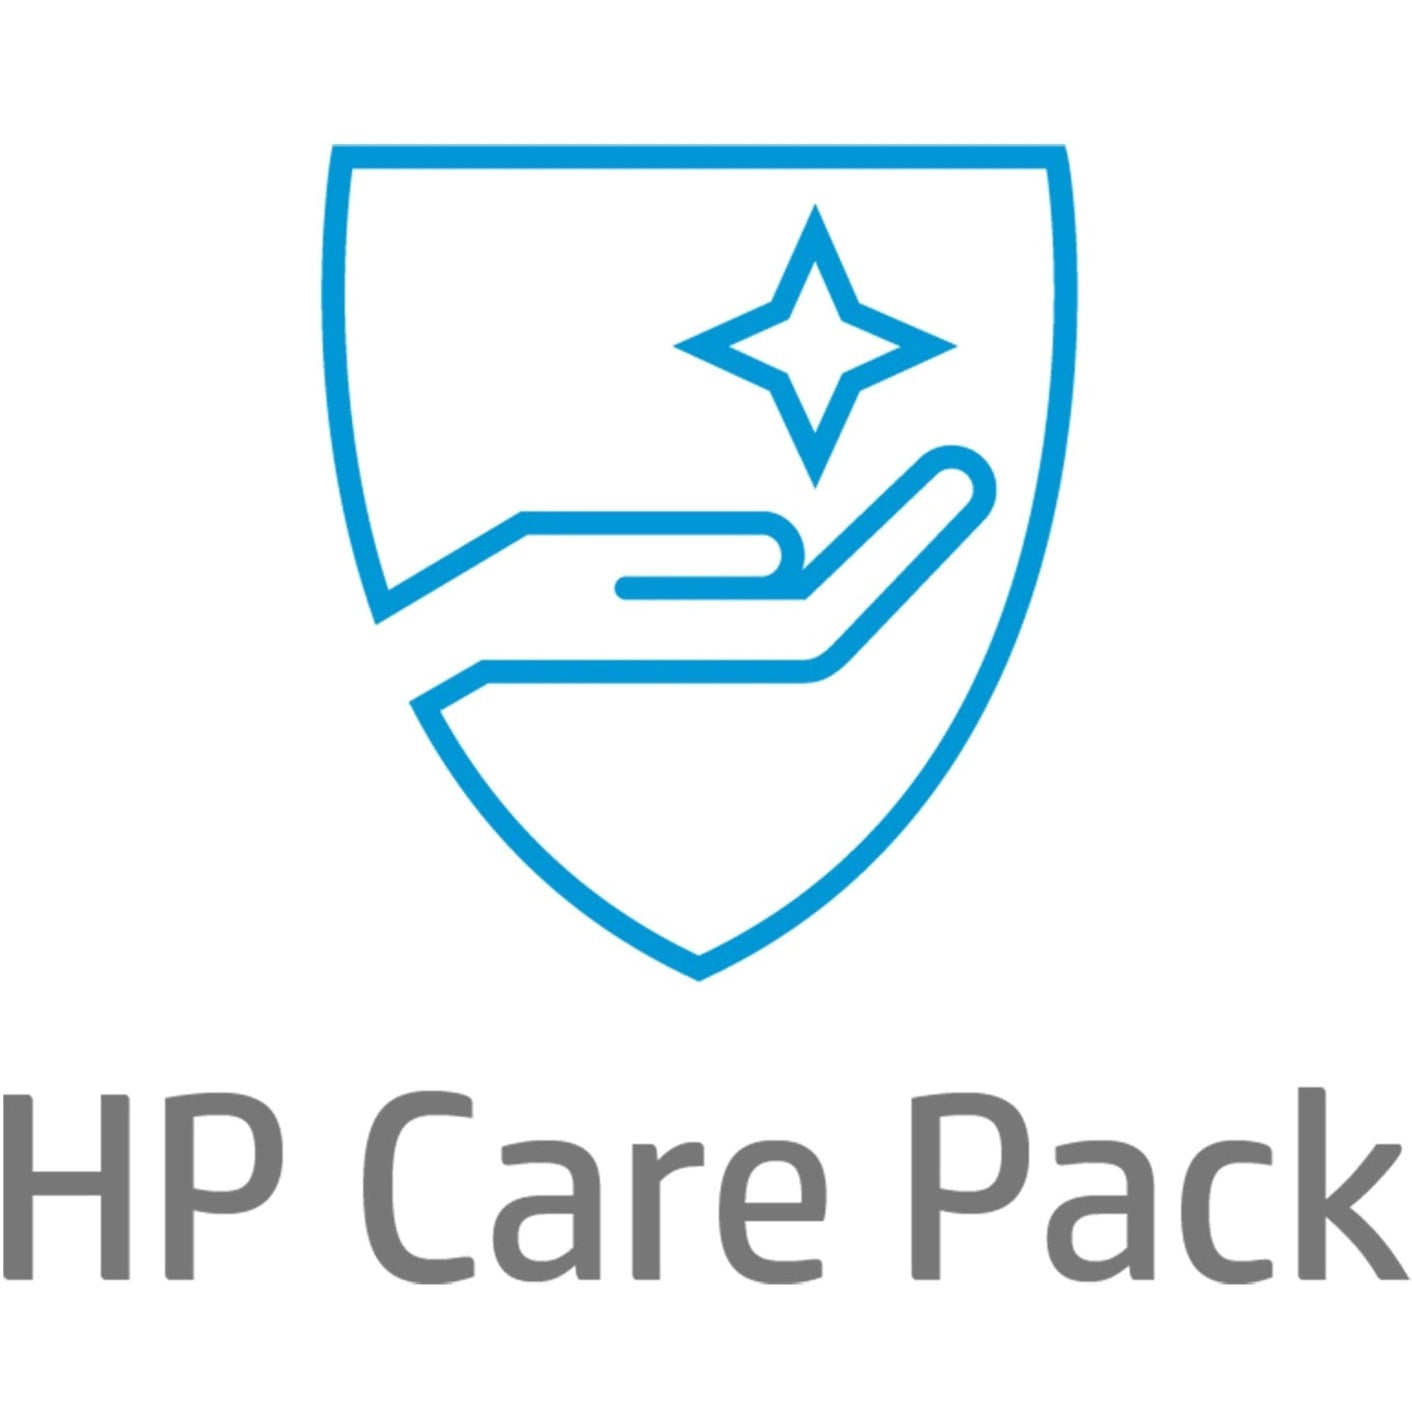 HP Care Pack - Extended Warranty - 4 Year - Warranty (U9DQ8E)